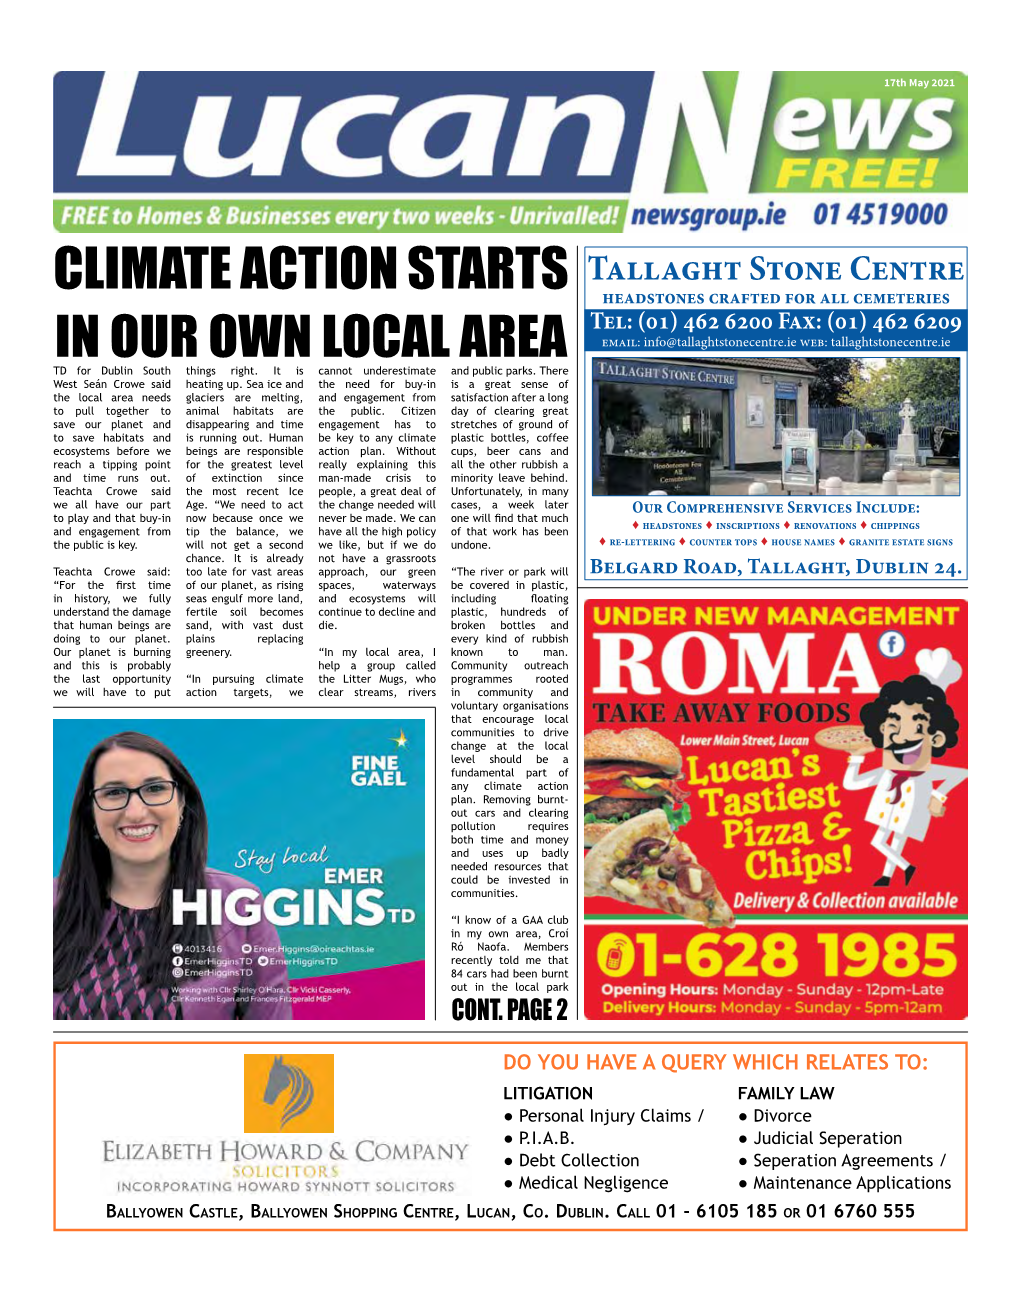 Climate Action Starts in Our Own Local Area